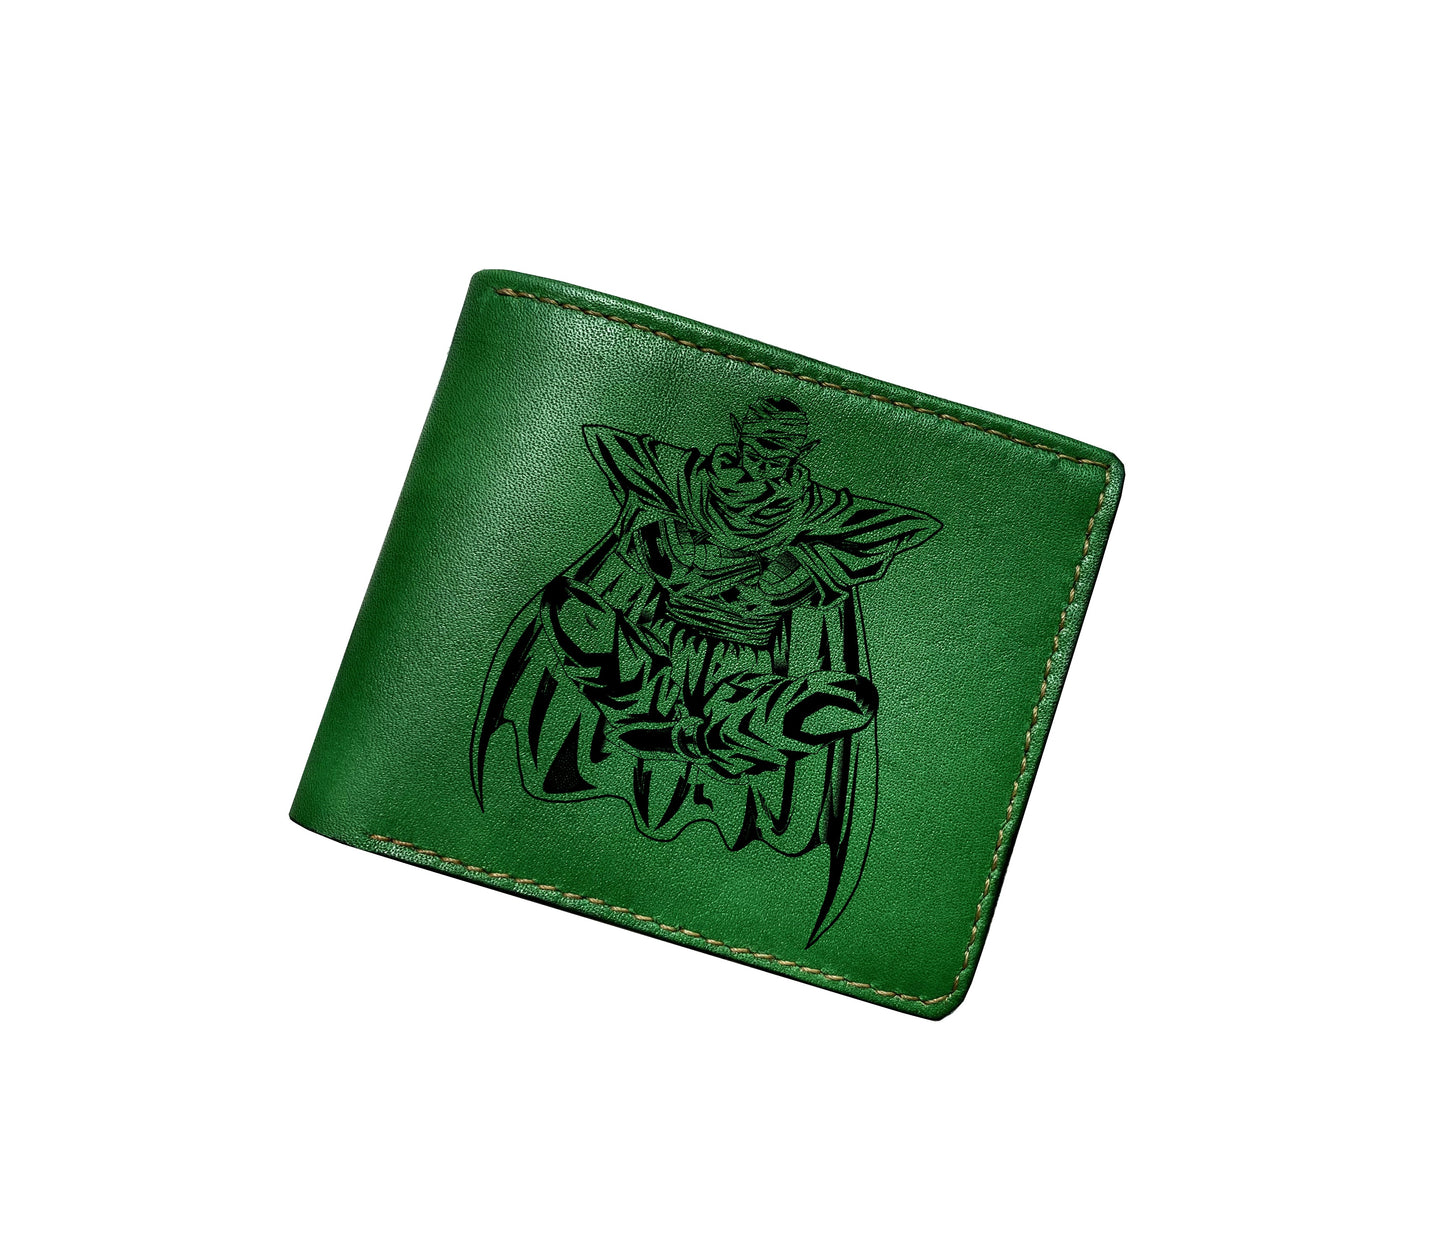 Mayan Corner - Dragon ball characters drawing leather wallet, fan art leather gift for men, wallet for him, leather anniversary present ideas - Freiza